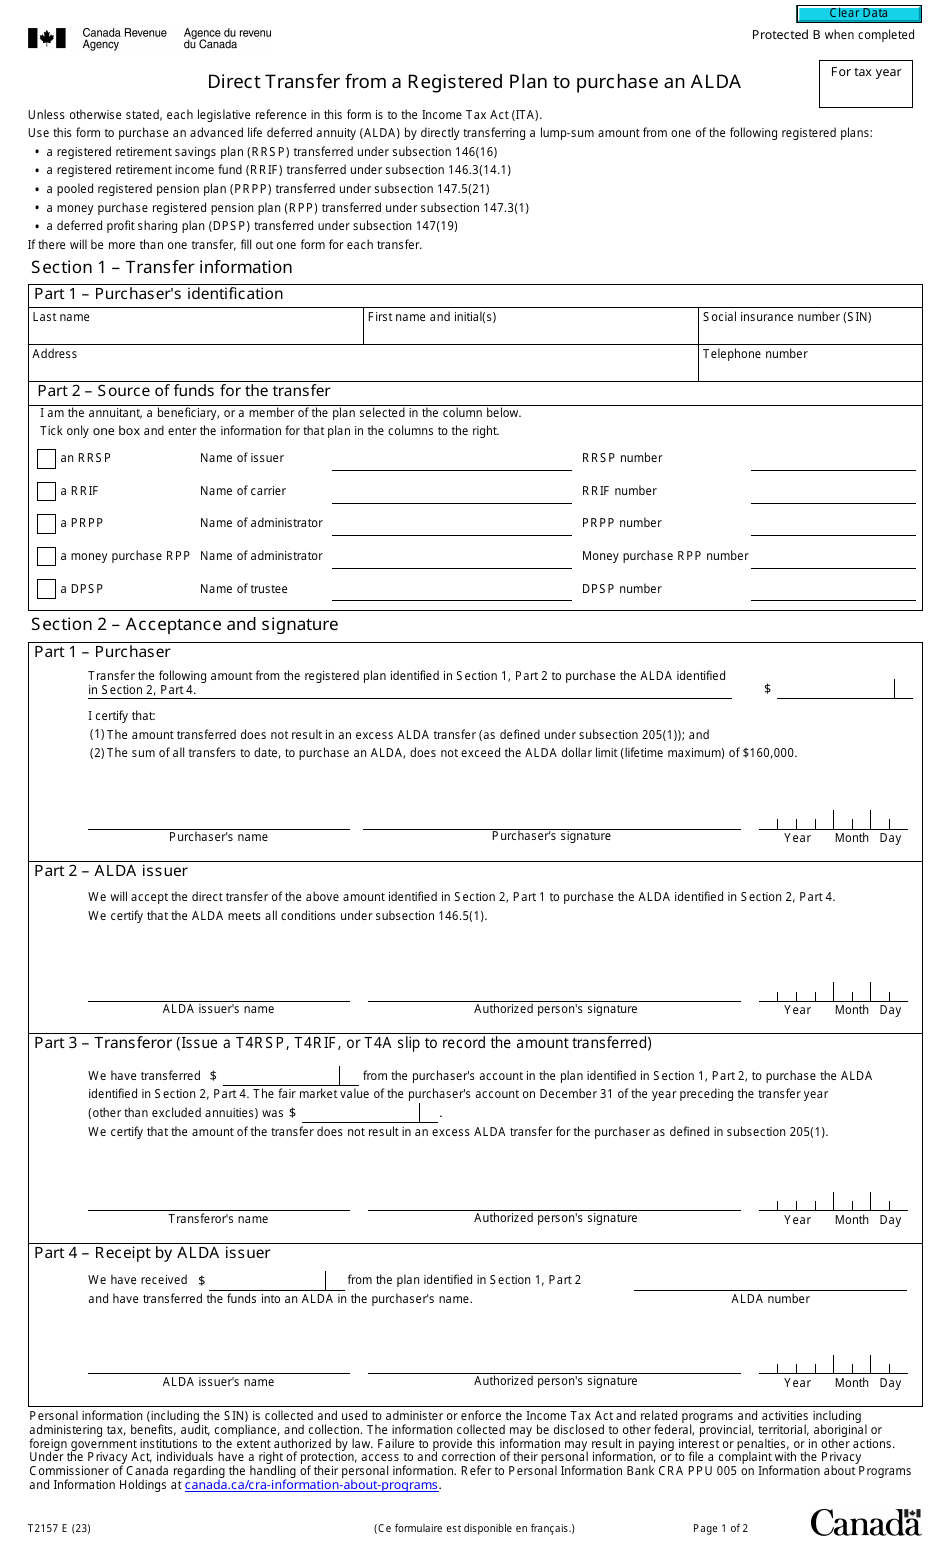 Form T2157 Direct Transfer From a Registered Plan to Purchase an Alda - Canada, Page 1